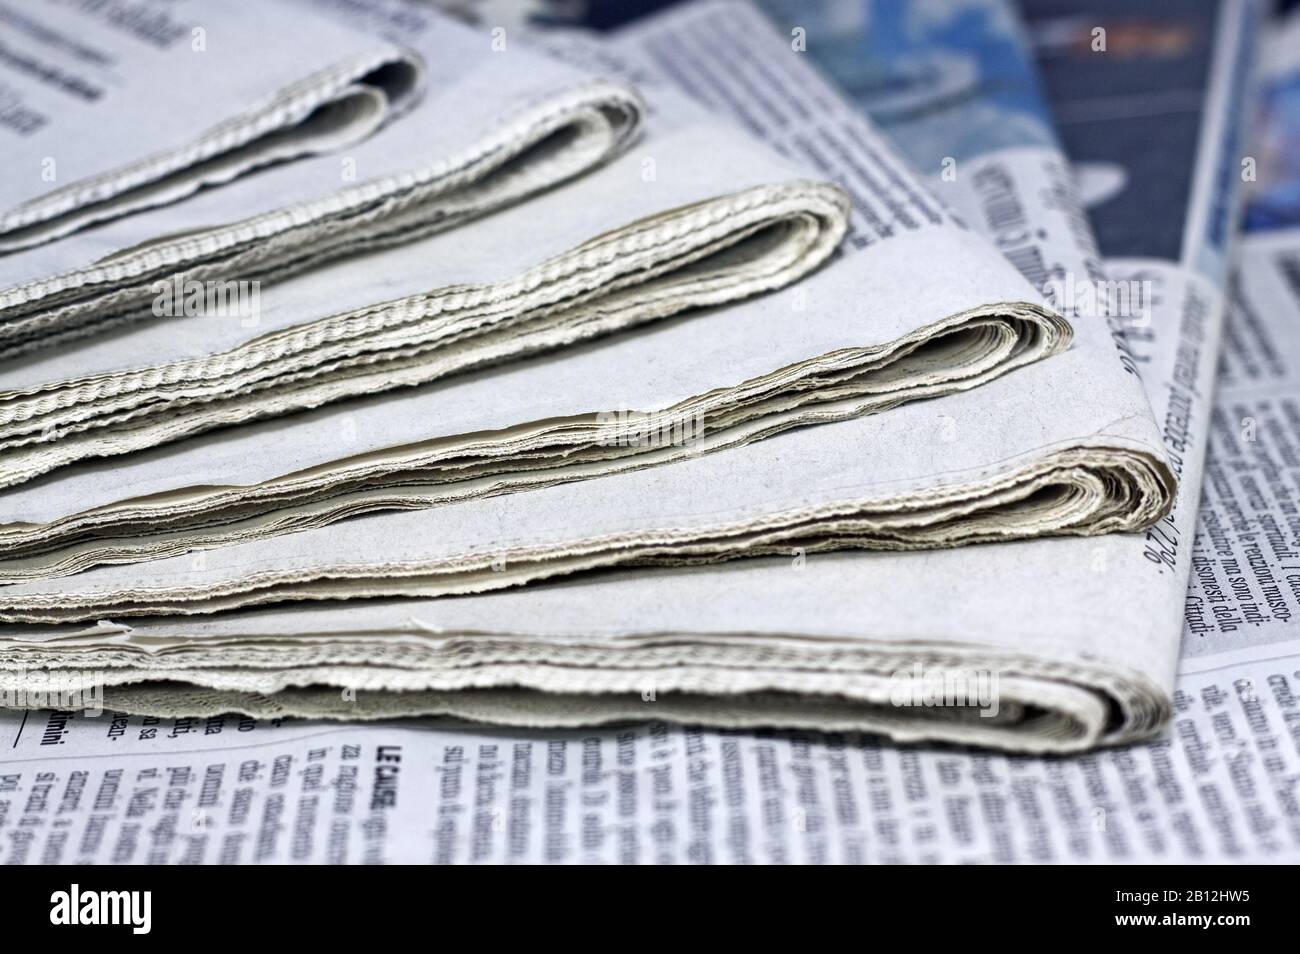 newspapers against plain background shot with very shallow depth of field Stock Photo